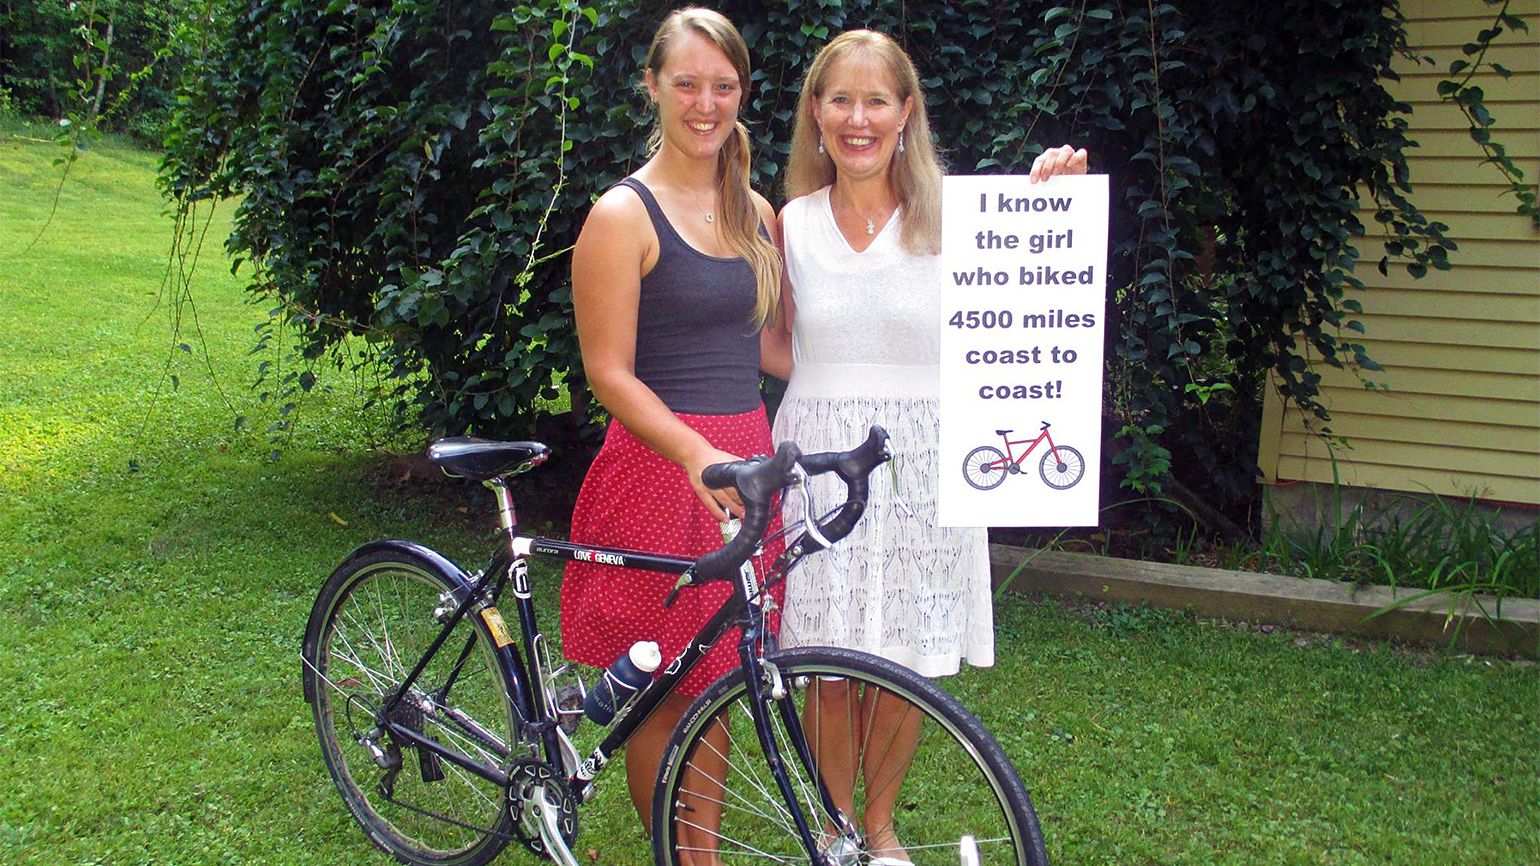 Proud mom Merry Lee poses with a sign celebrating her daughter Deborah's accomplishments in completing the memorable cross-country bike trek.